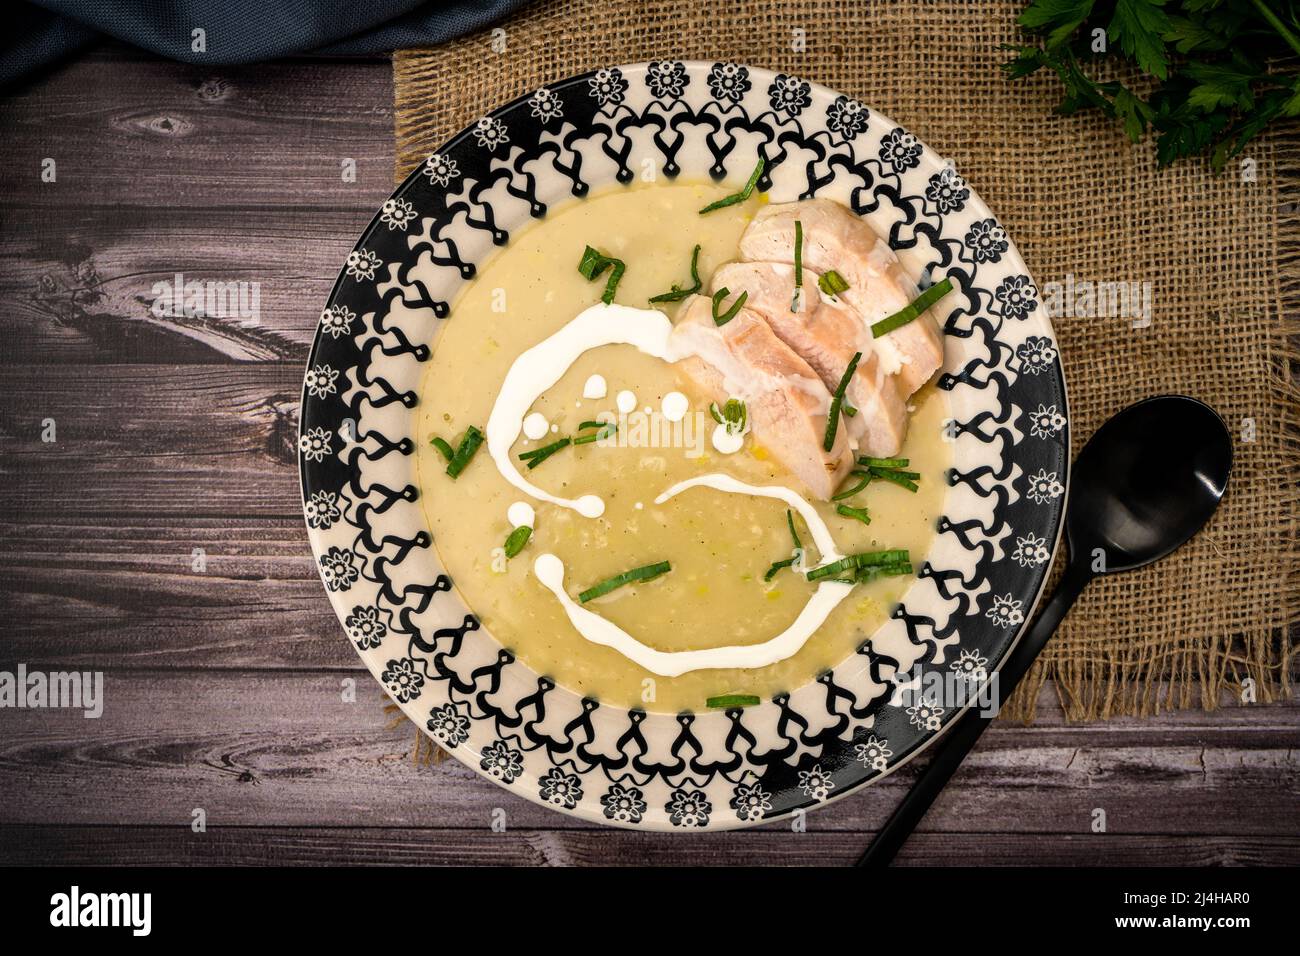 Exquisite vintage dish with a homemade cream of poultry soup in a rustic or country setting. Natural and sensible food concept. Top View Stock Photo